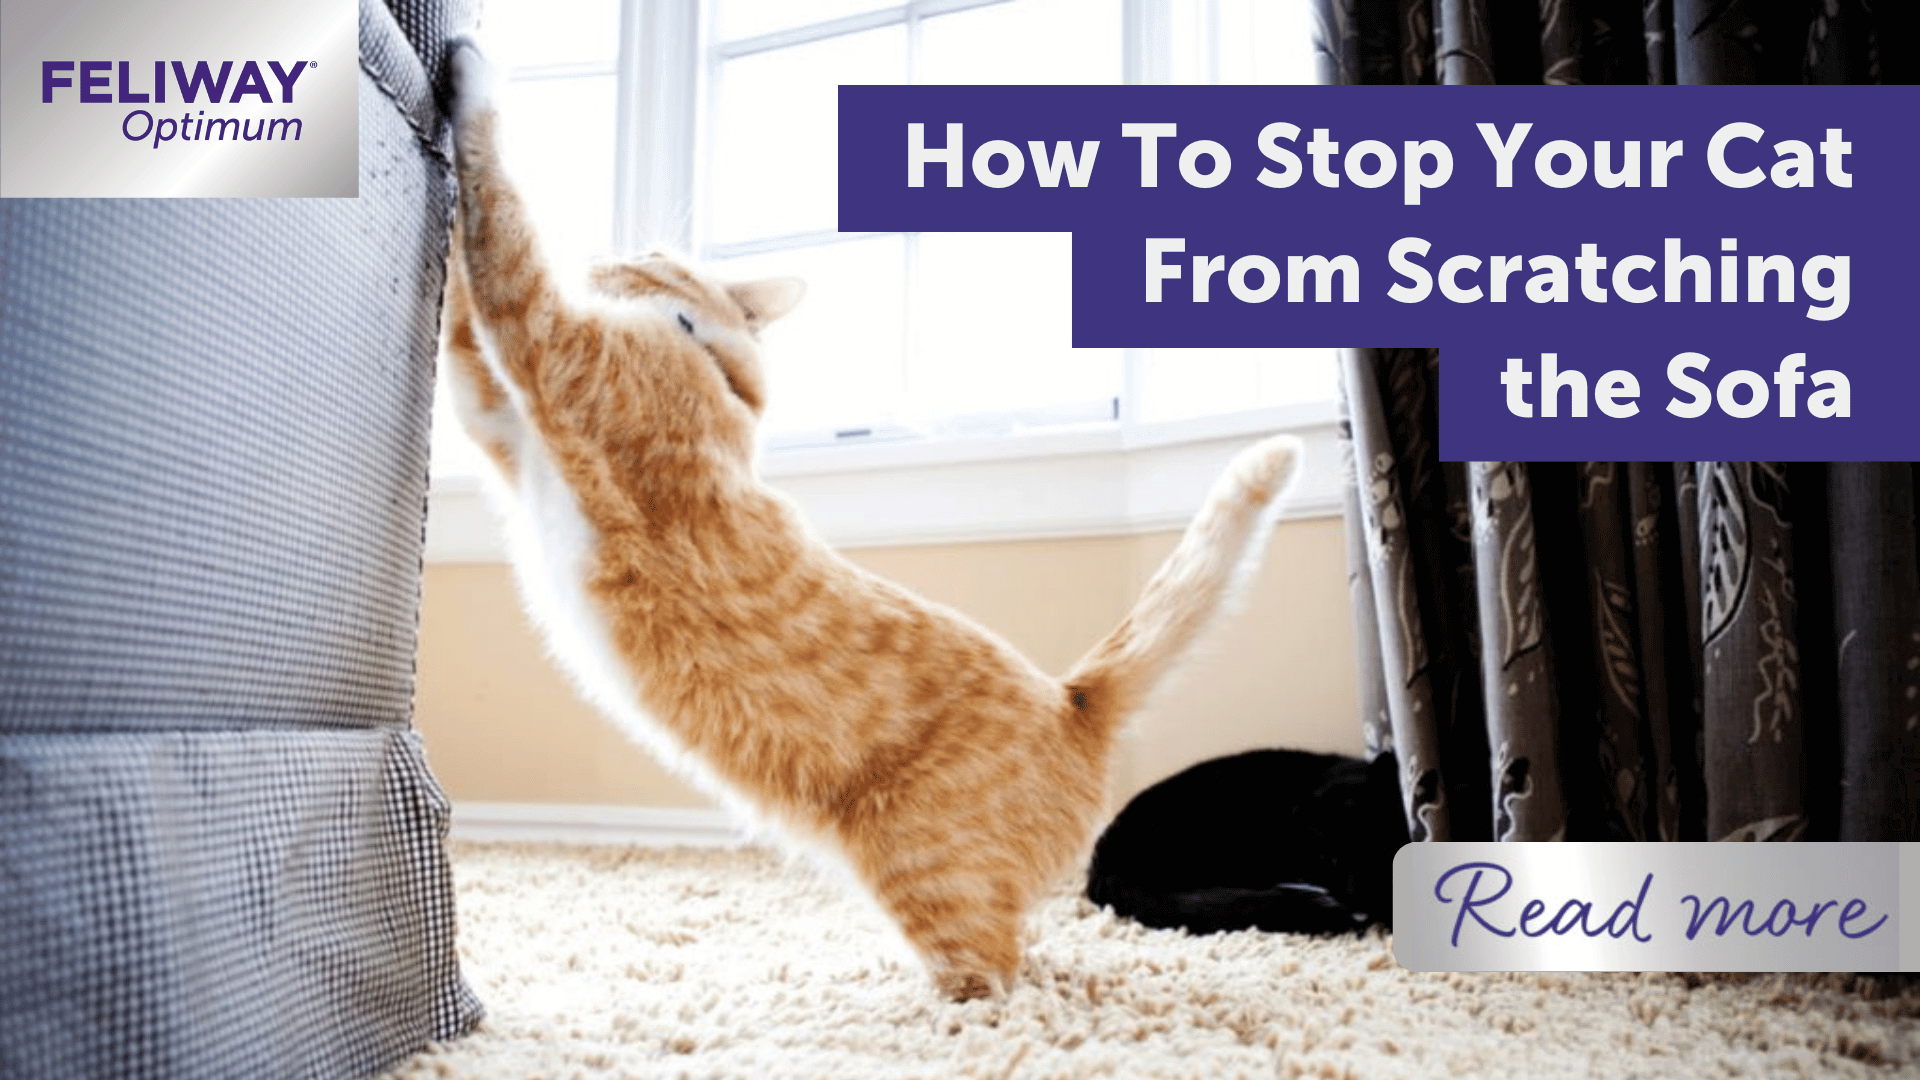 How To Stop Your Cat From Scratching the Sofa